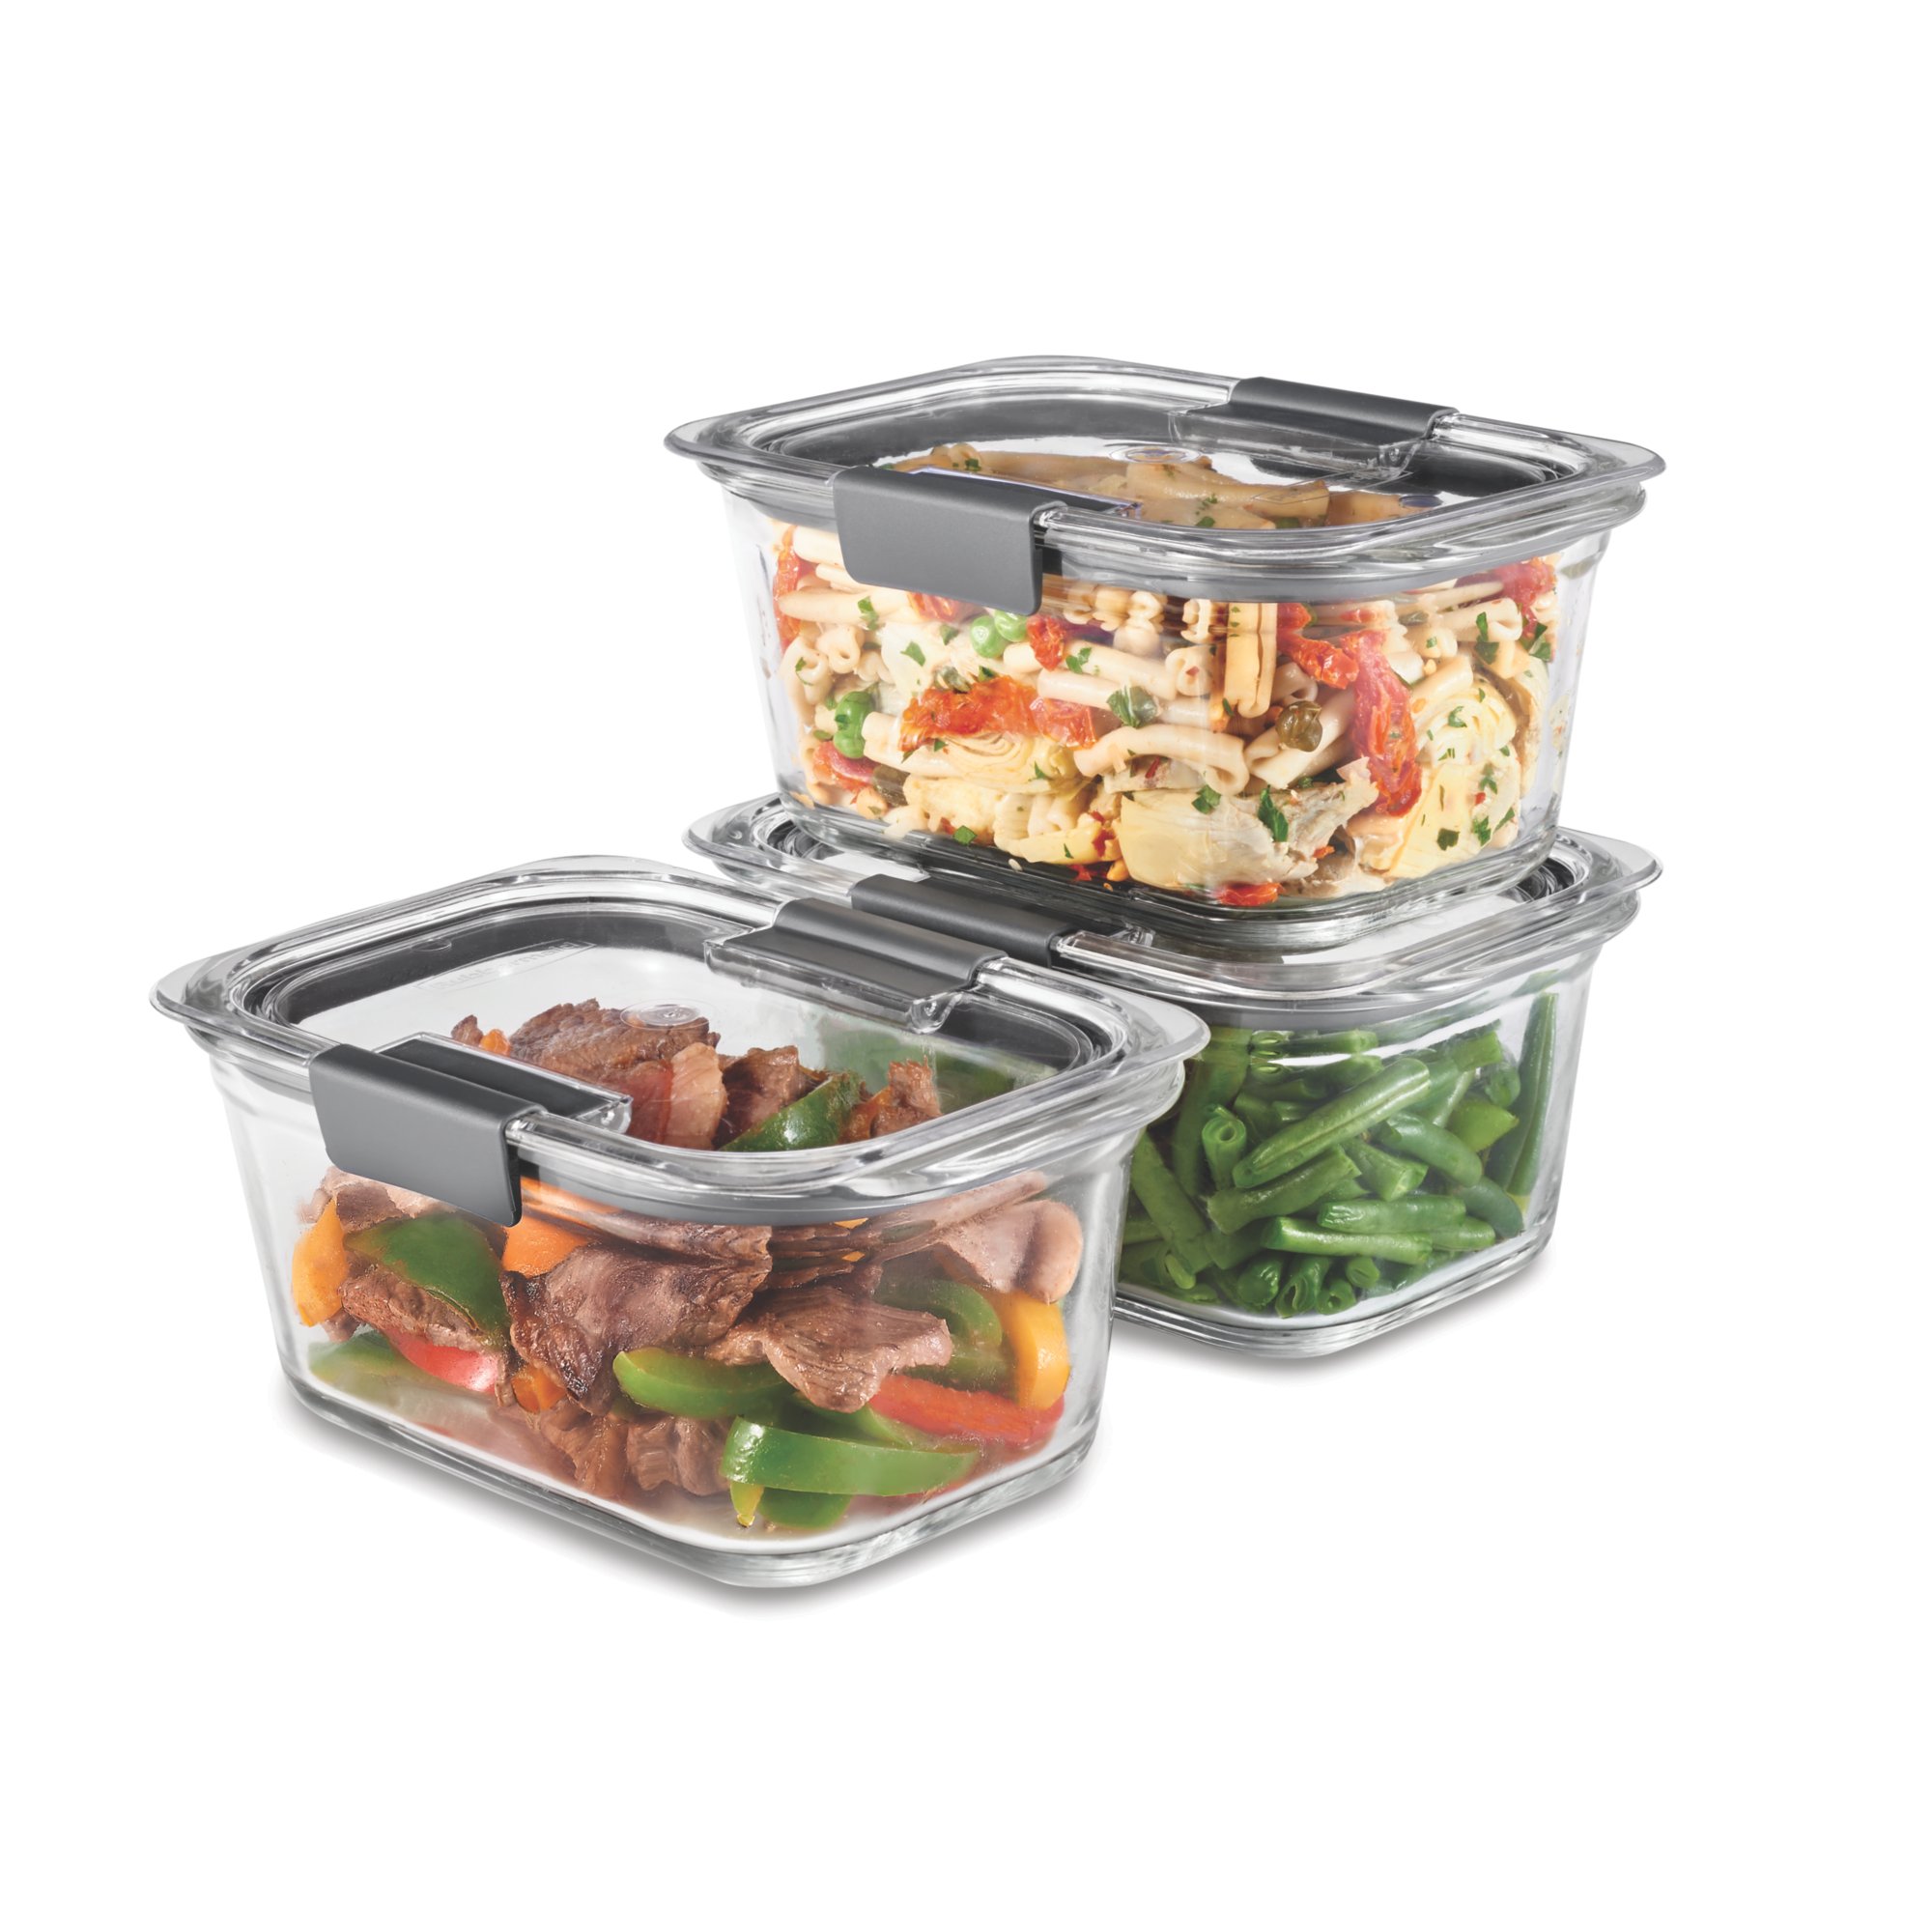 Rubbermaid on Instagram: Meal prep for the win! 🏆🍱 With these Rubbermaid  Brilliance containers, you're set for a week of healthy and hassle-free  meals 🌟 No more stress or time wasted on